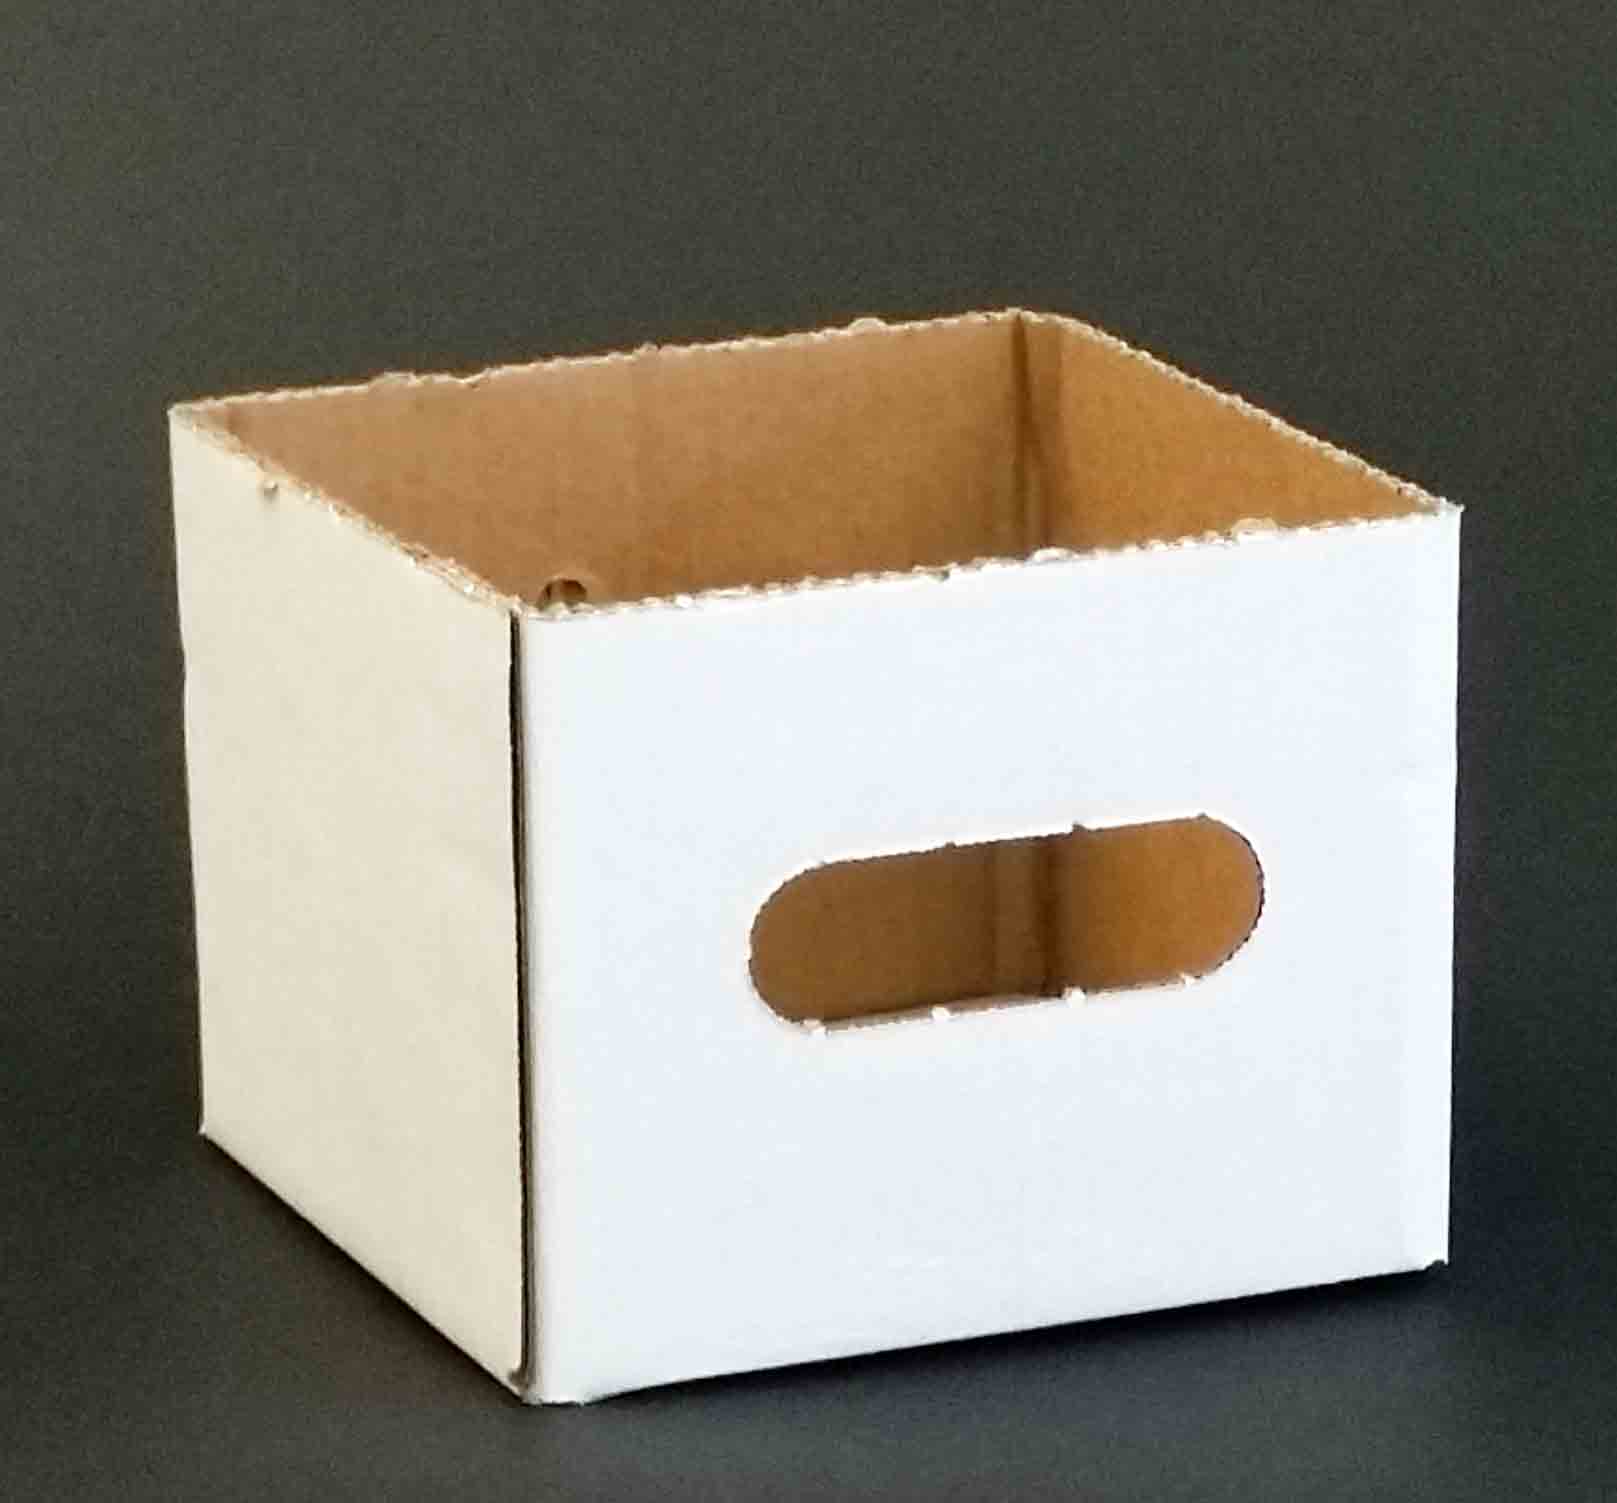 765 - 6 x 6 x 5" Delivery Box - 27.90 bdle of 50